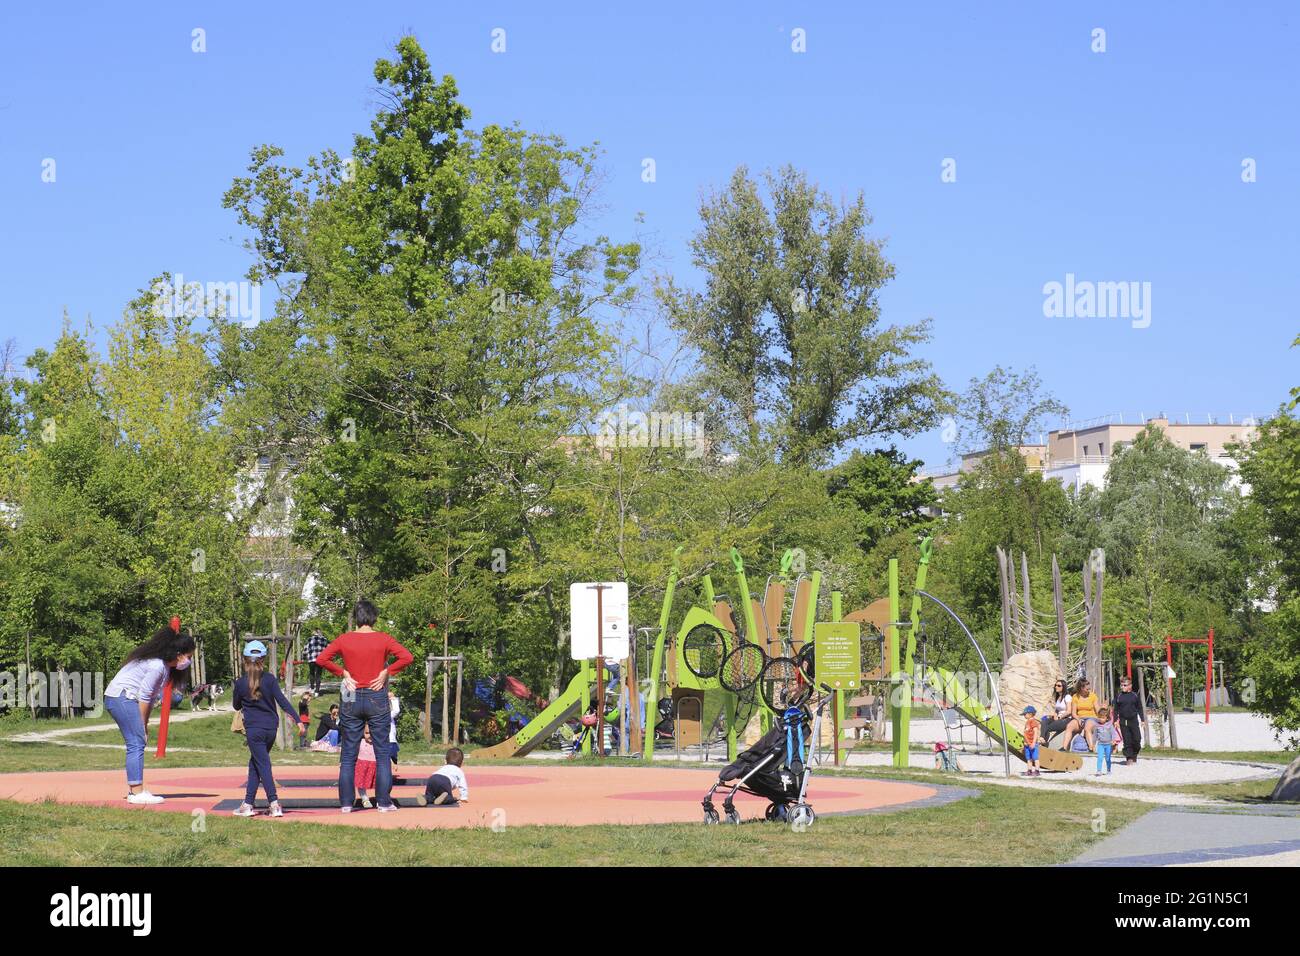 France, Gironde, suburb of Bordeaux, Bruges, Ausone park (12 hectares) opened in 2019 and designed by the landscape designer Graziella Barsacq and the agency Moonwalk Local, space for children Stock Photo